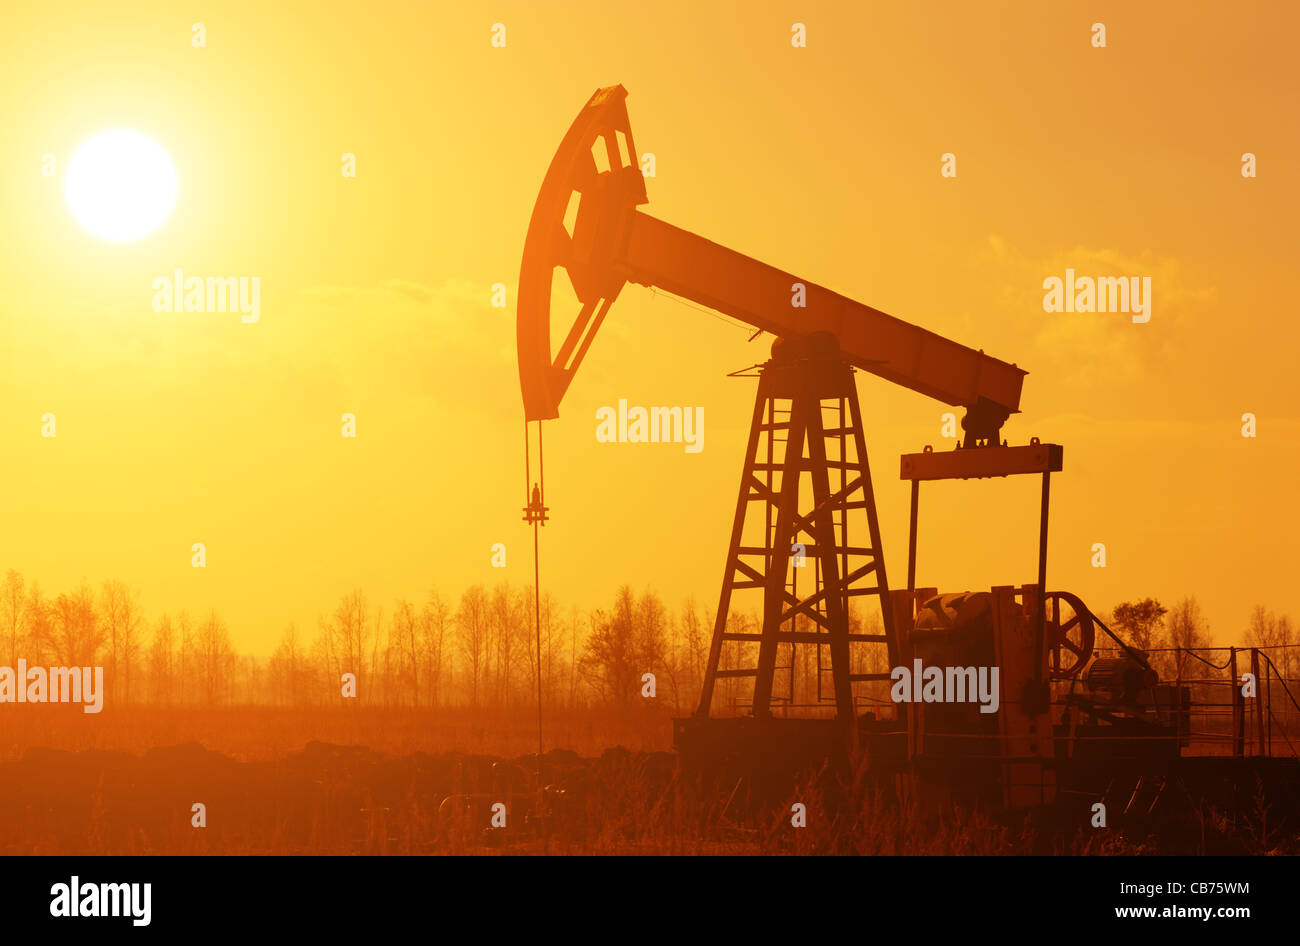 oil rig on the plains selective focus on nearest Stock Photo